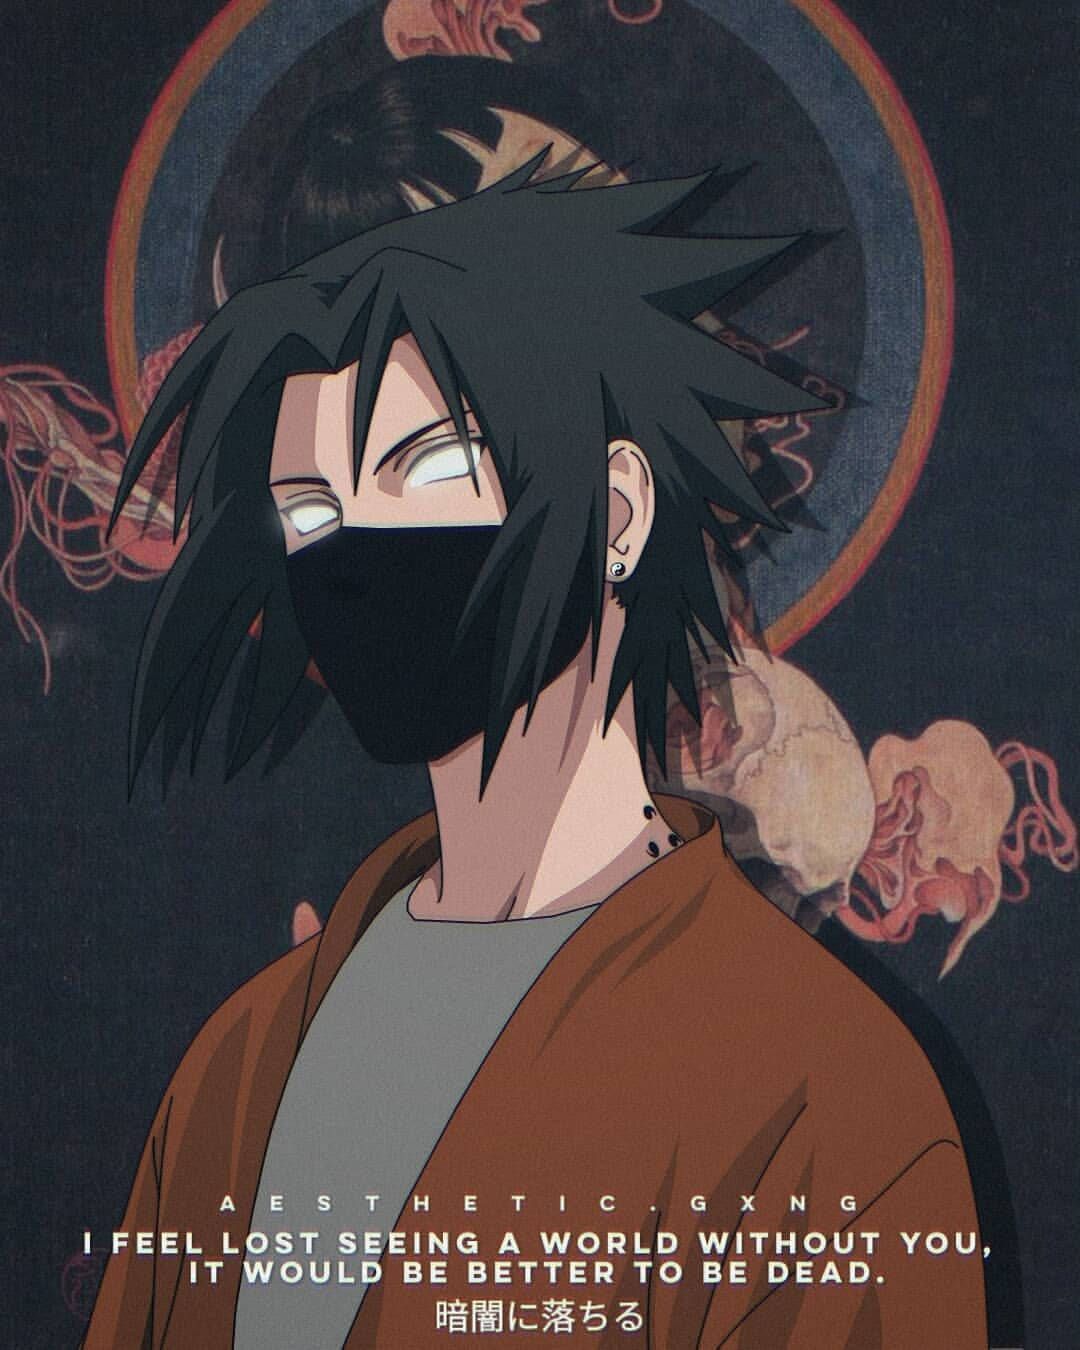 Aesthetic anime wallpaper of sasuke from naruto with the quote 